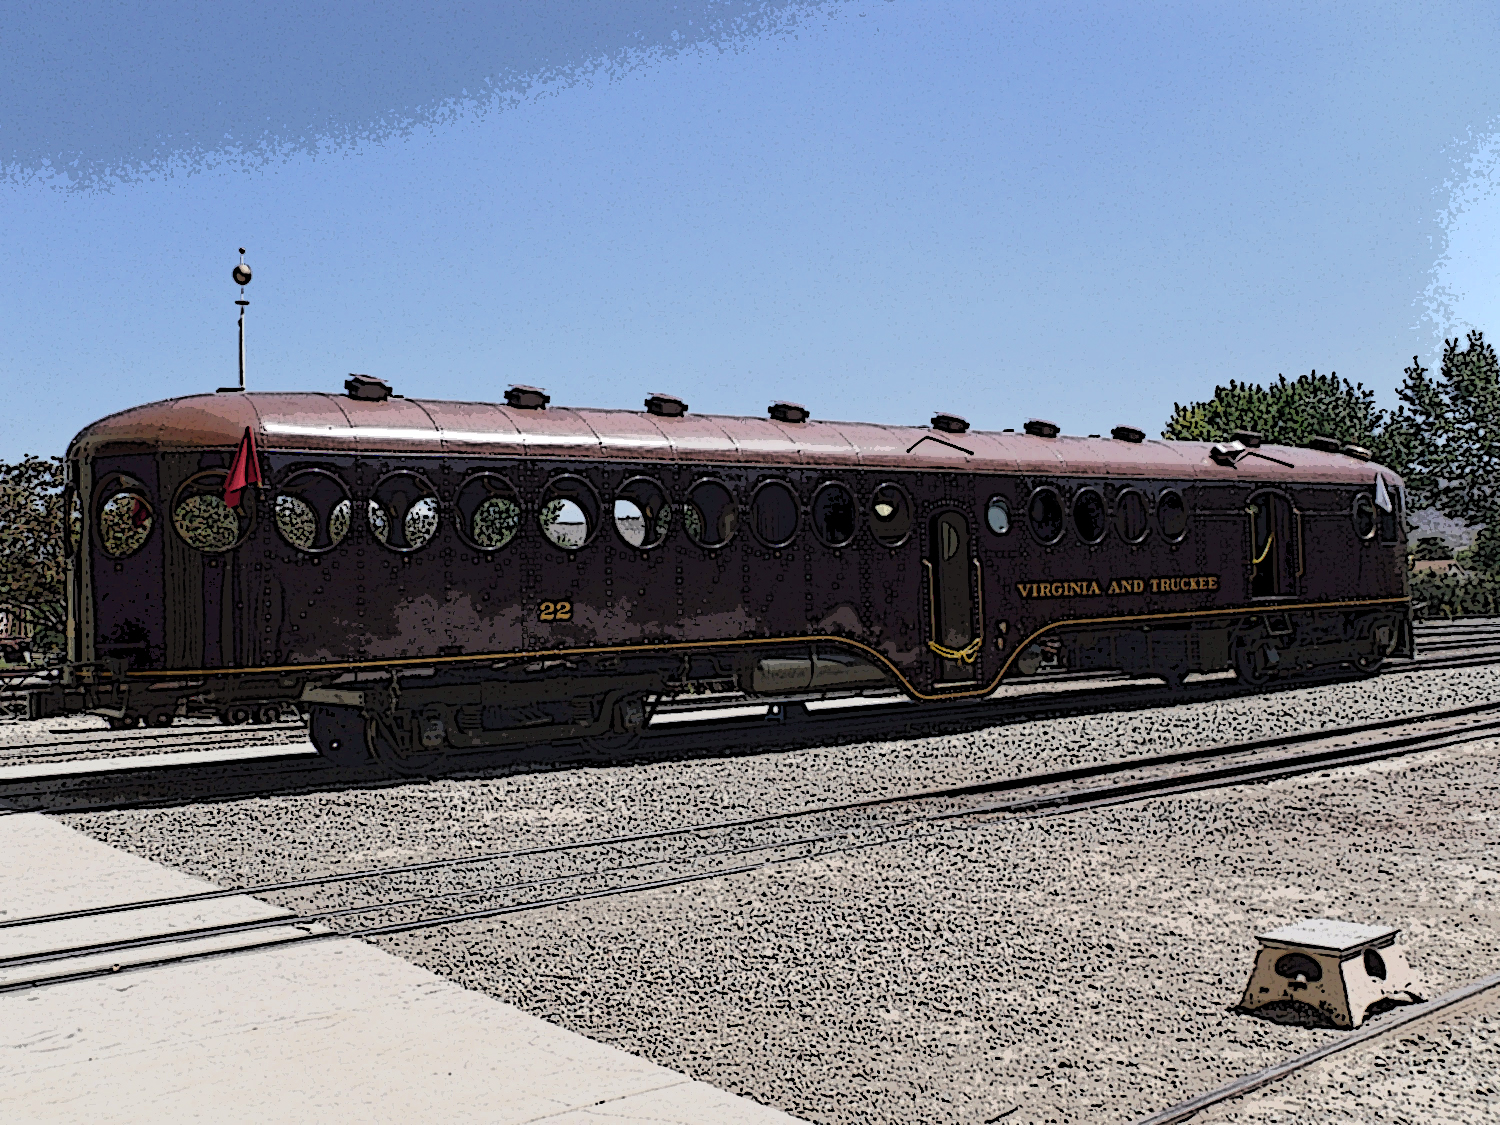 During the 3rd week of August, Katherine and I took a week to getaway to the Sierra Nevada mountains. Pictures included in this gallery are from the Lake Tahoe area, the Nevada State Railroad Museum in Carson City, the National Auto museum in Reno, and a Reno Aces baseball game.